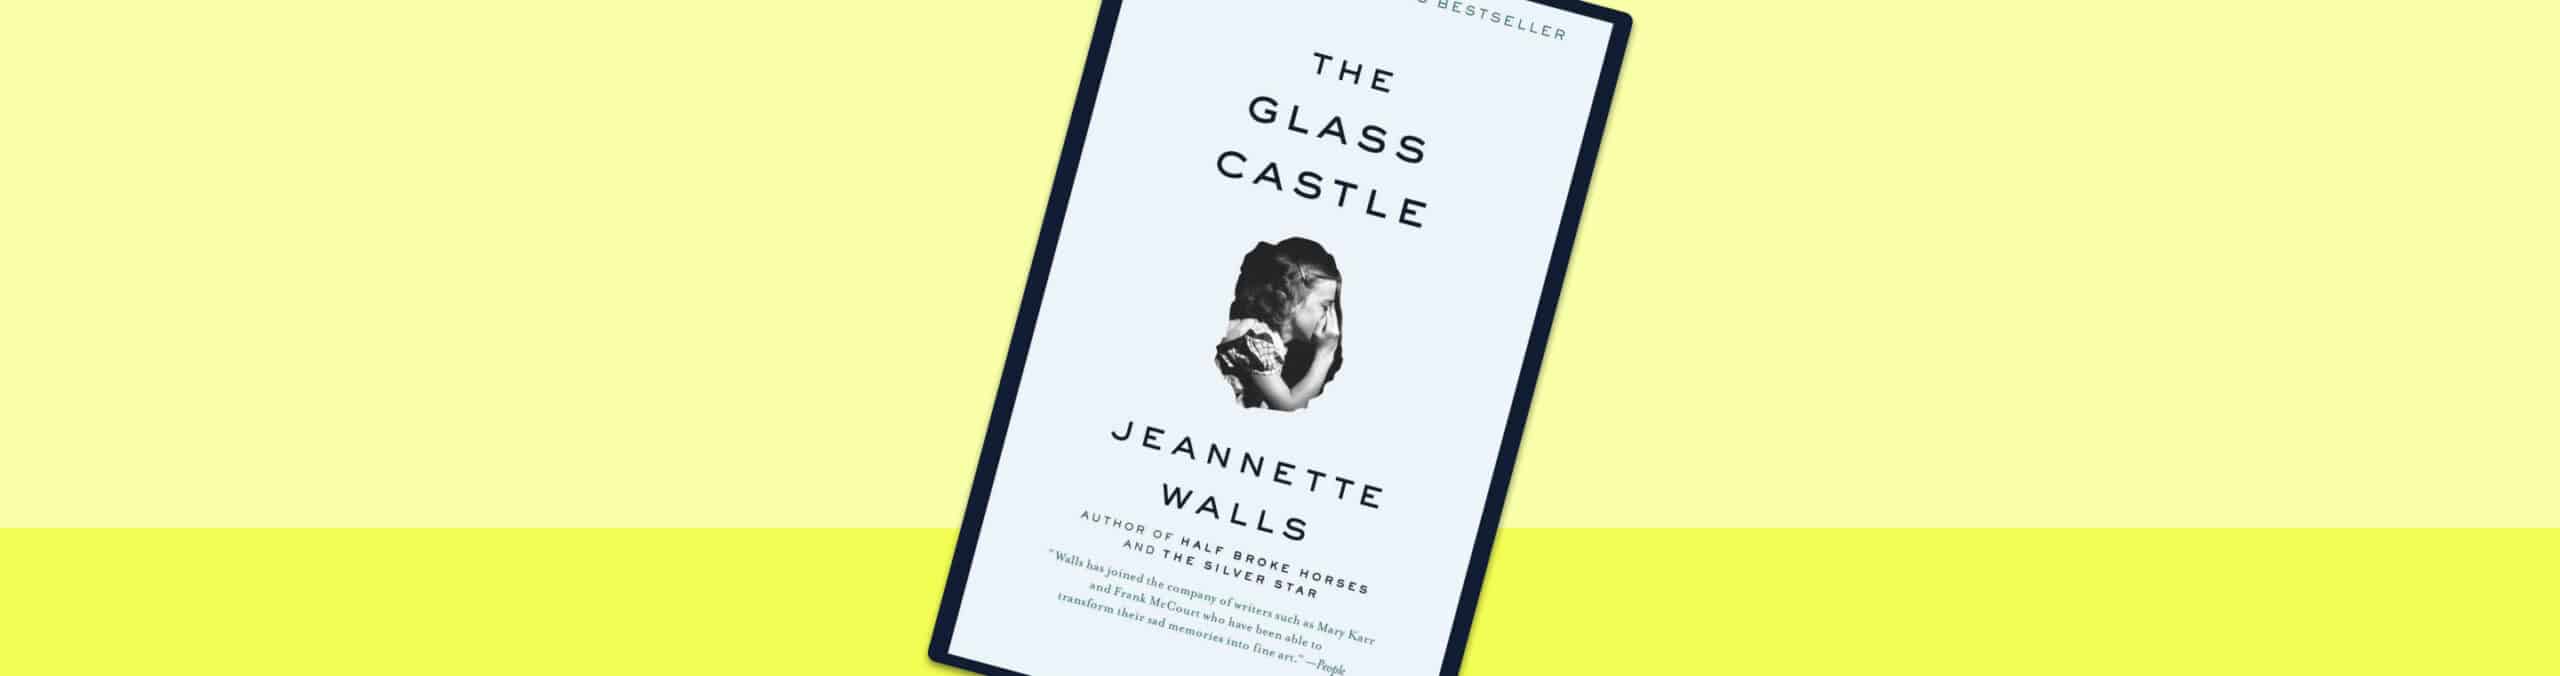 9 book club questions for ‘The Glass Castle’ by Jeannette Walls